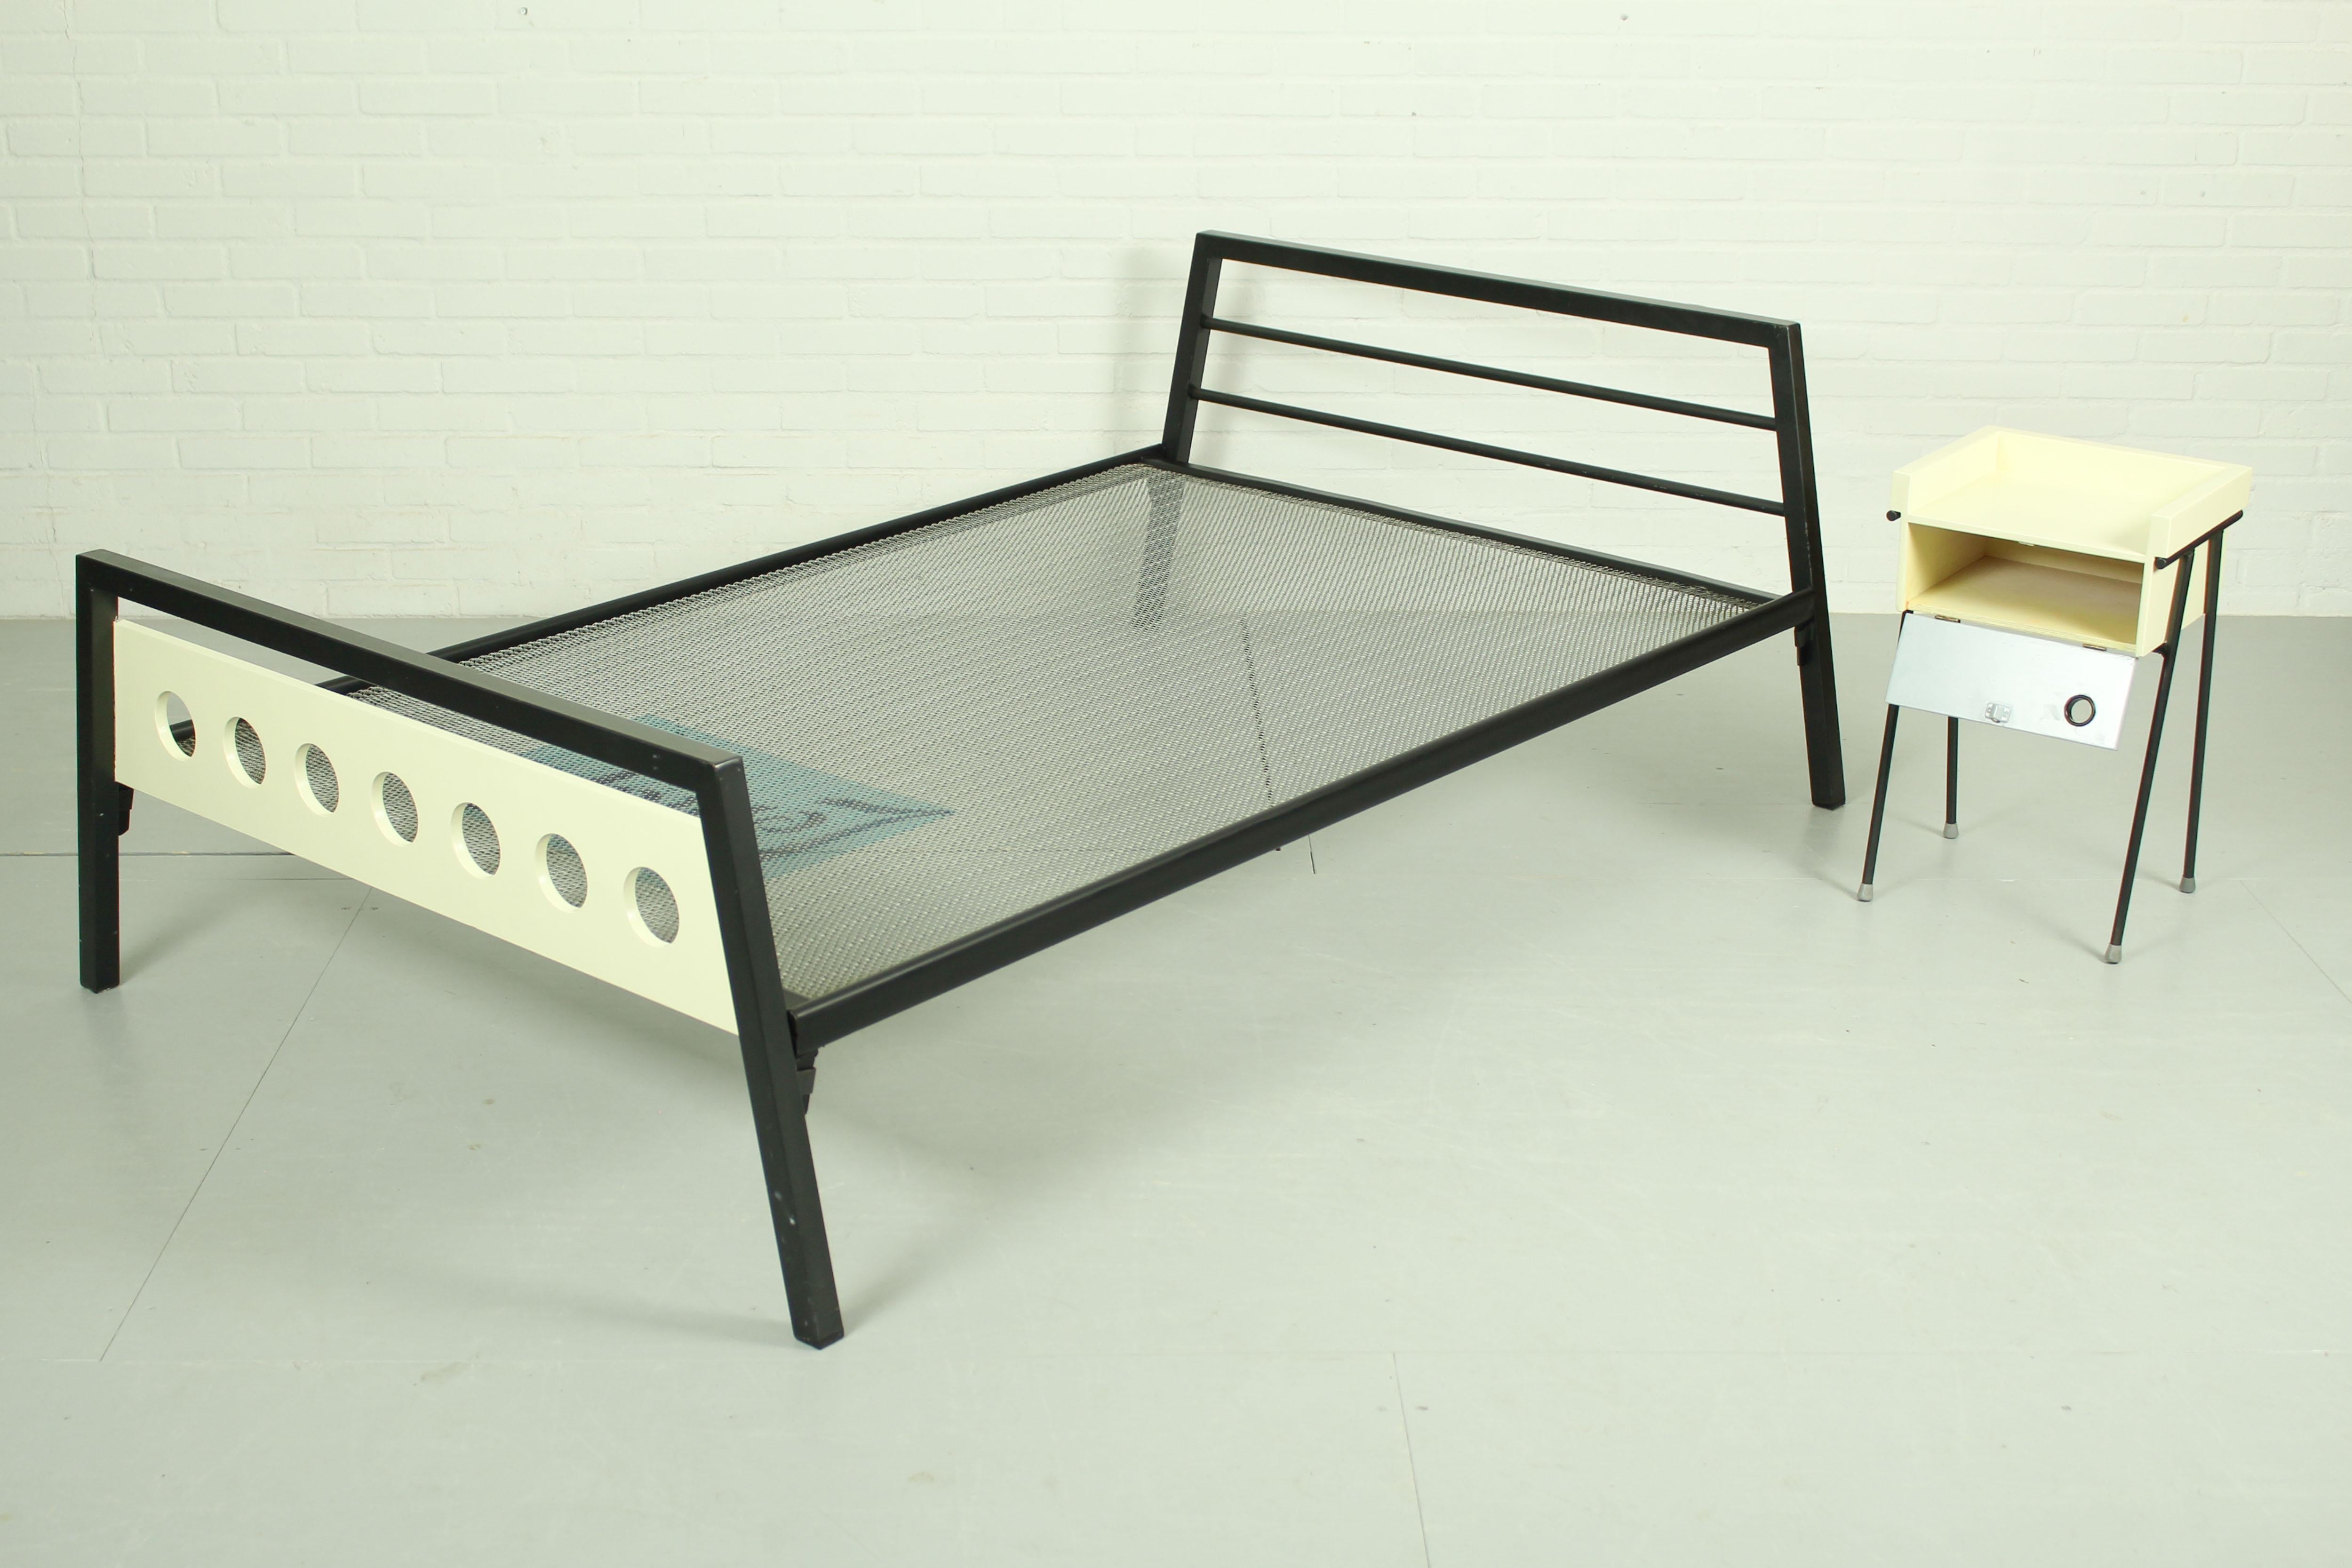 Metal Rob Parry and Emile Truijen Bed, Chair and Nightstand for Dico series 